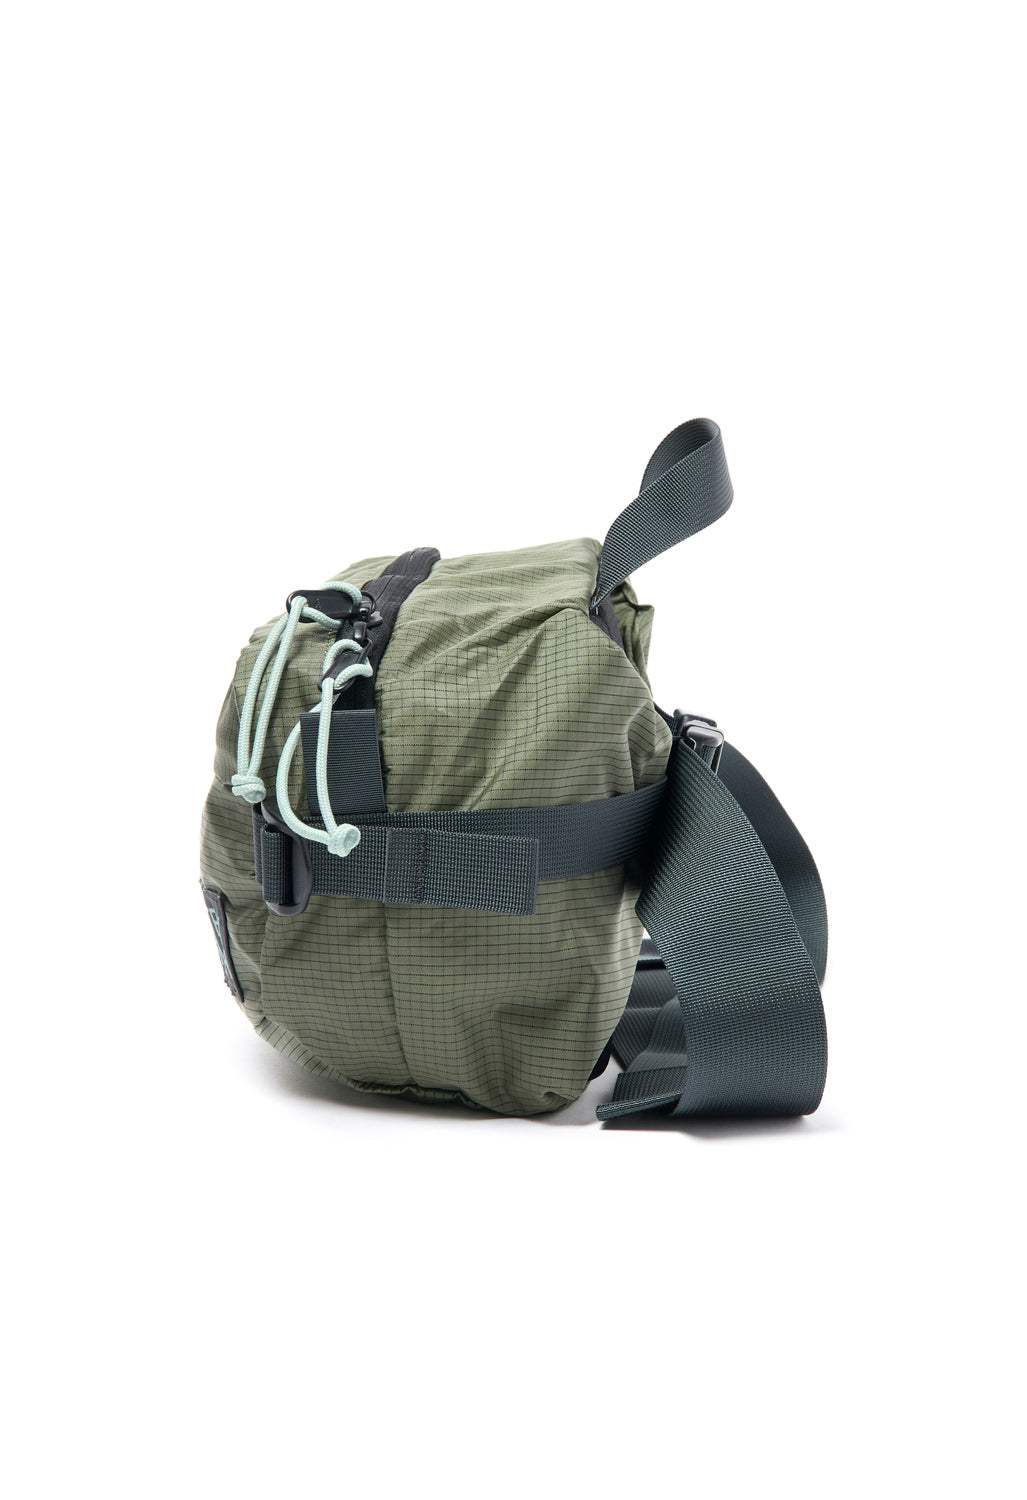 Mystery Ranch Full Moon Hip Pack - Twig